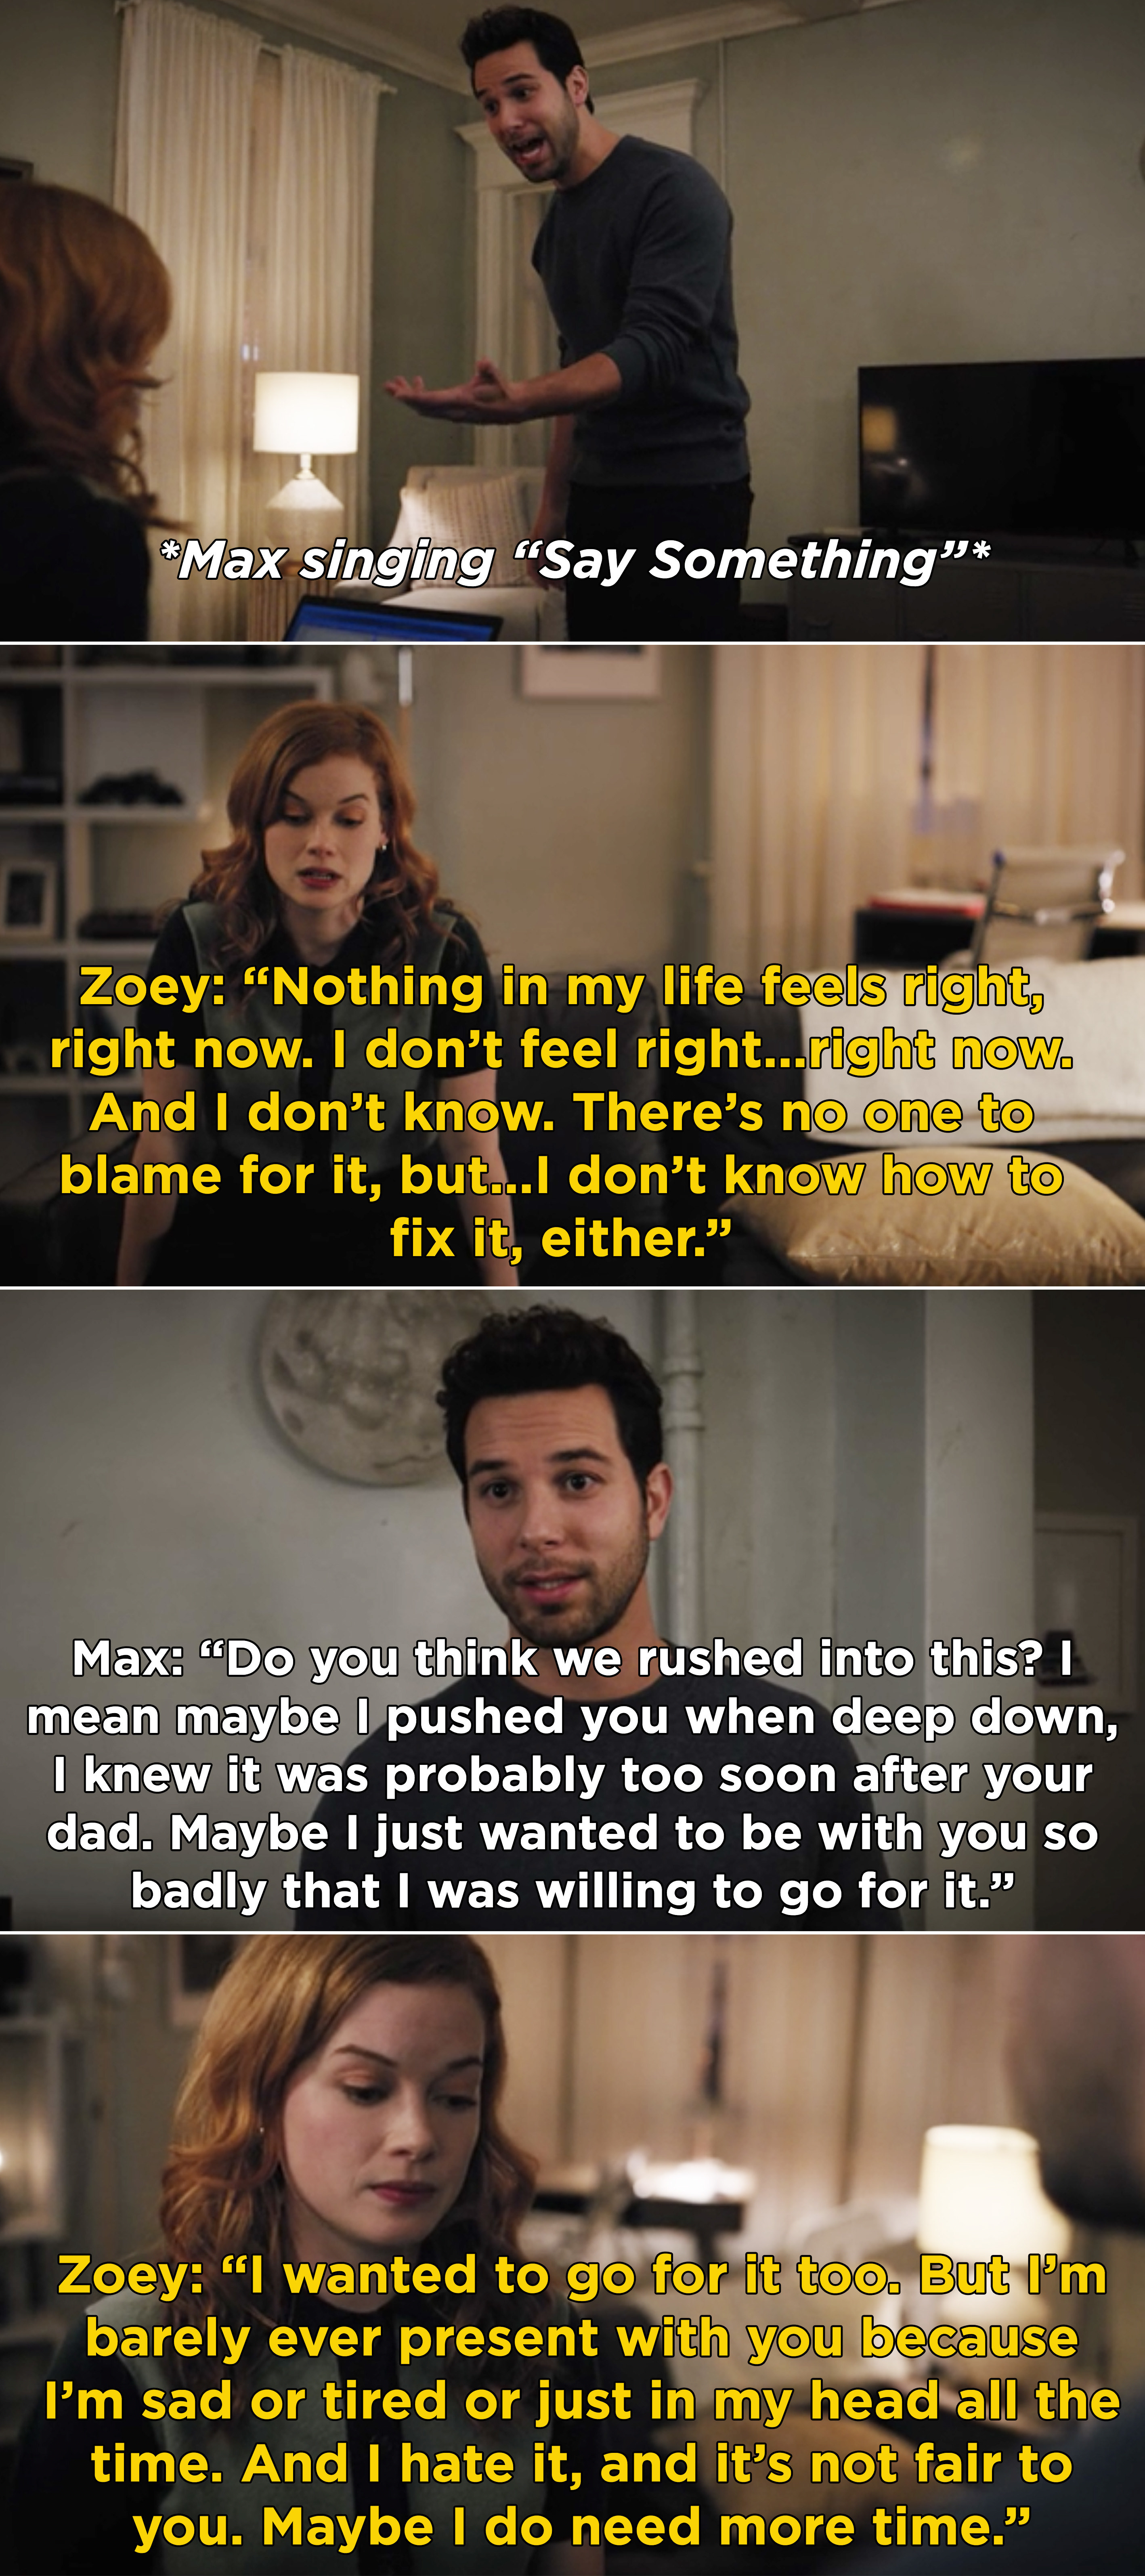 Zoey telling Max that nothing feels right and Max saying that they rushed into things